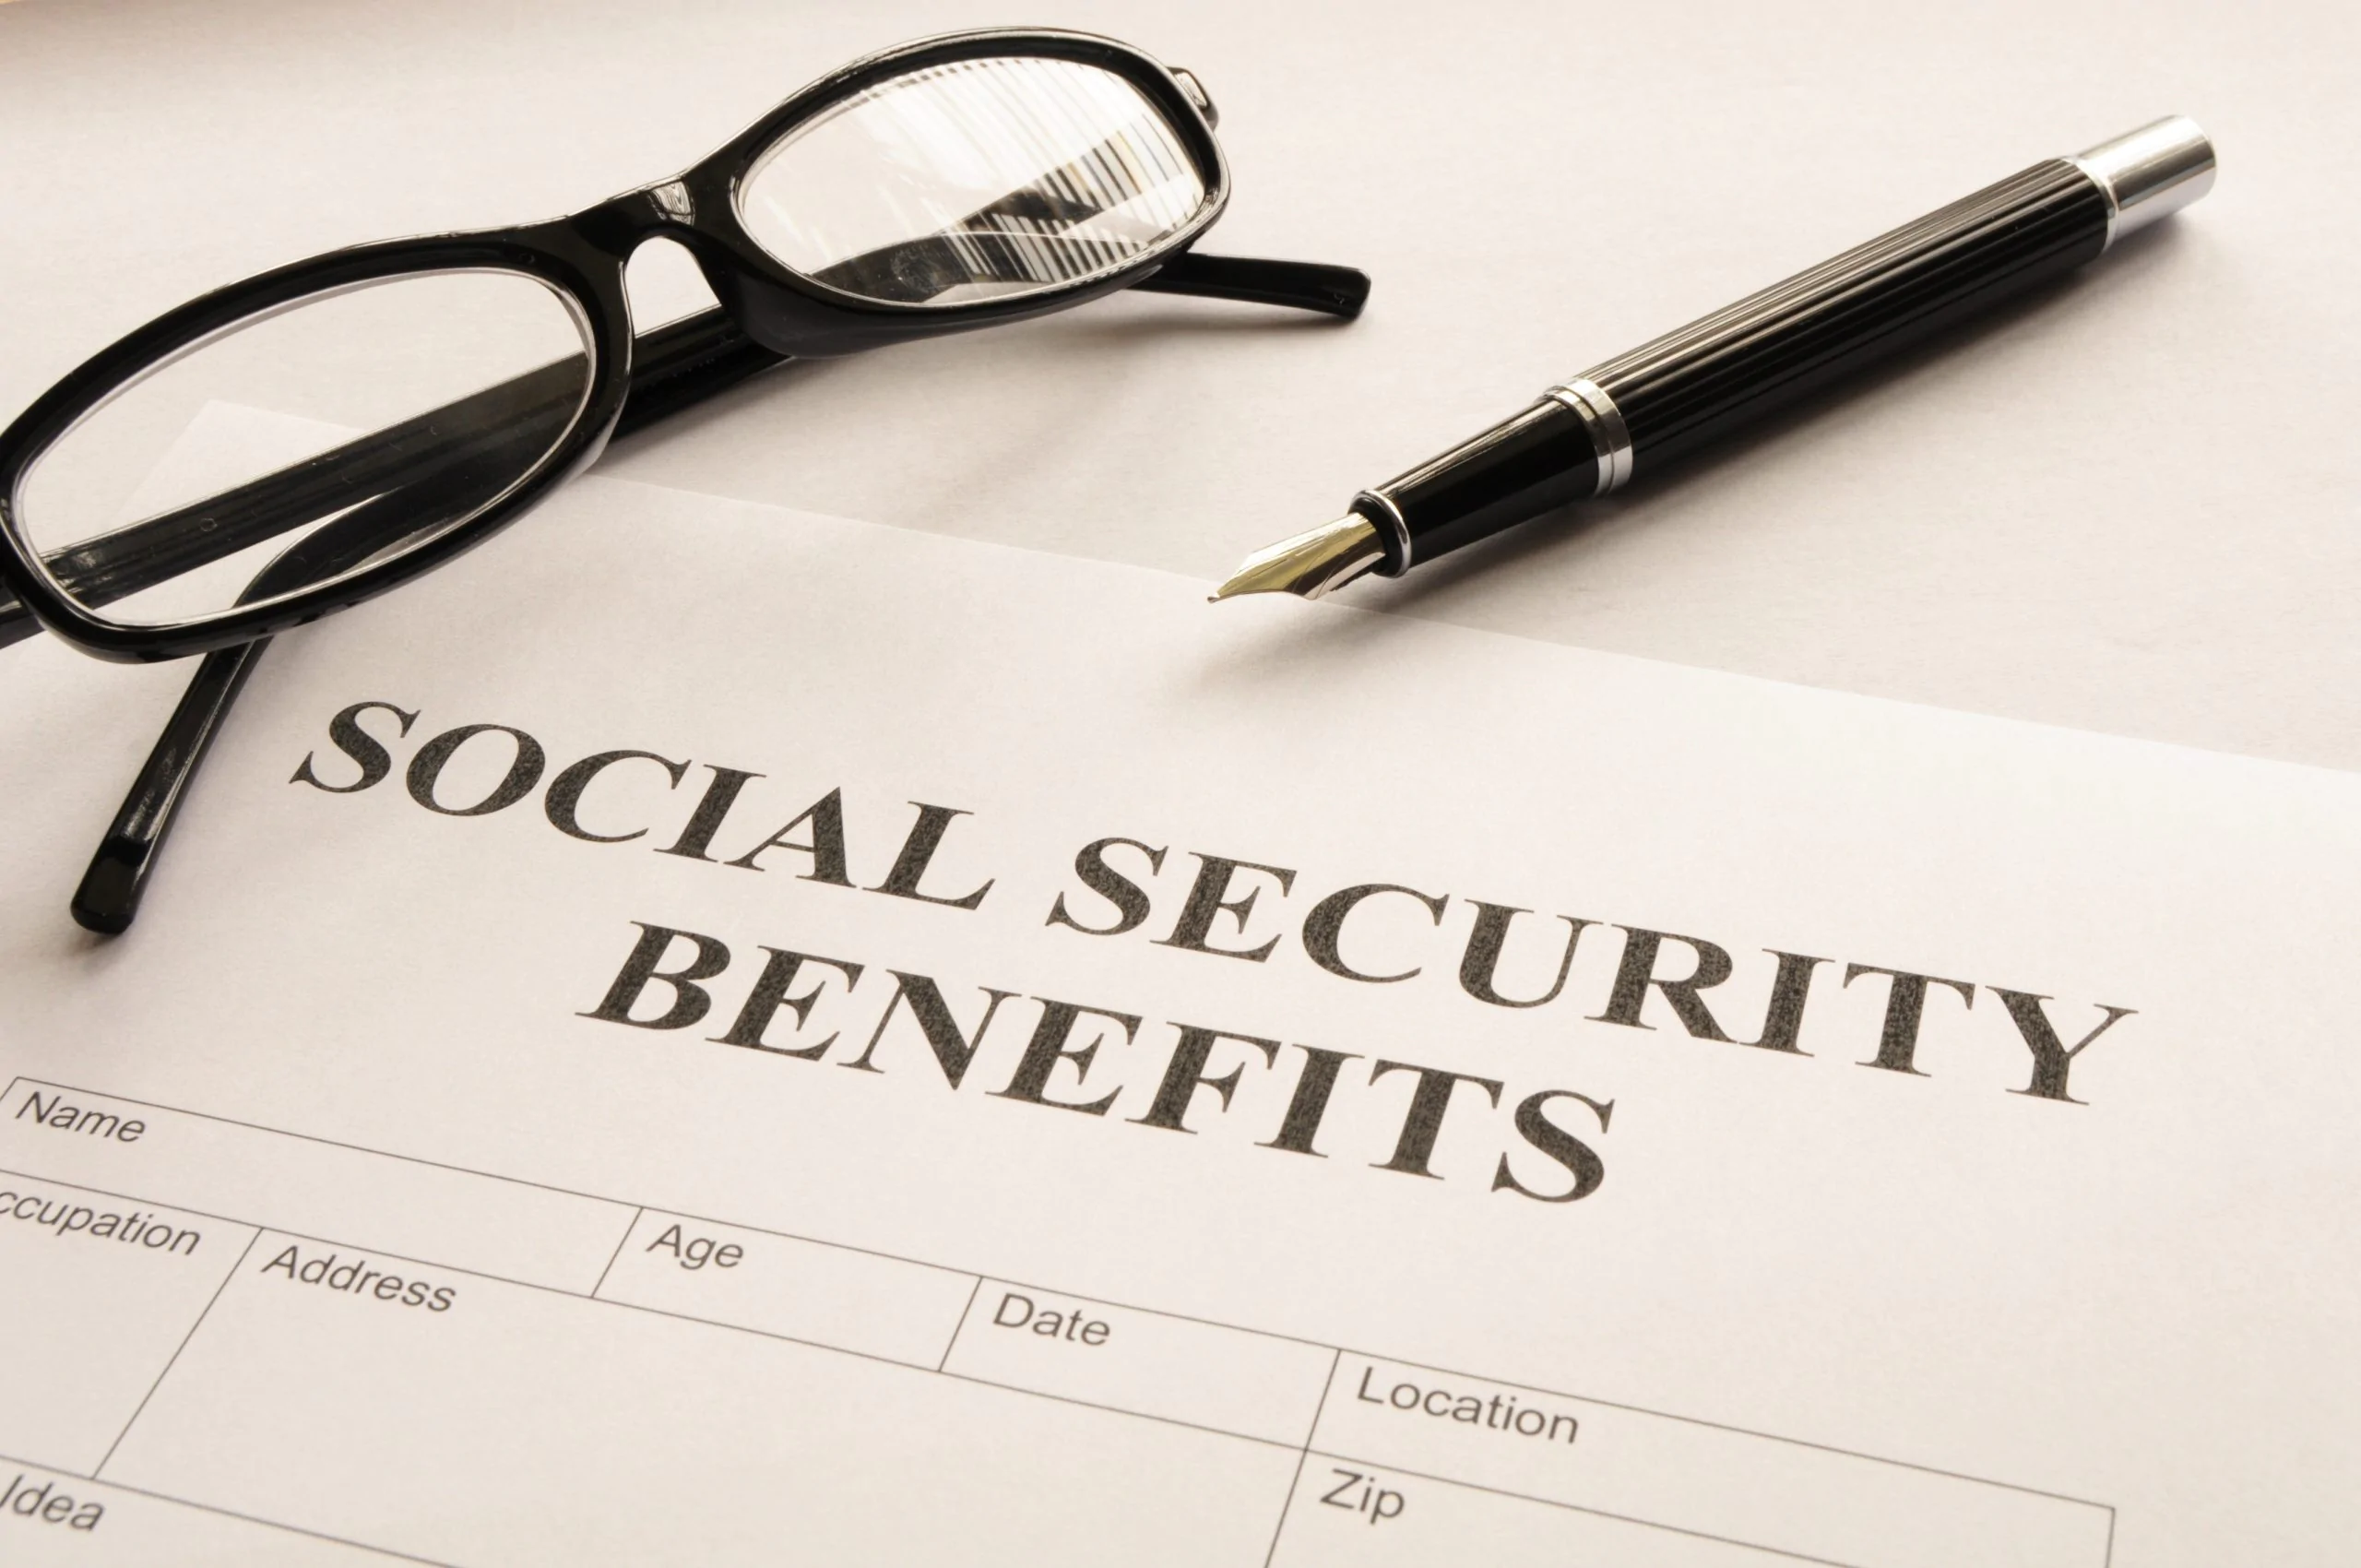 ssdi and ssi benefits, requirements and differences